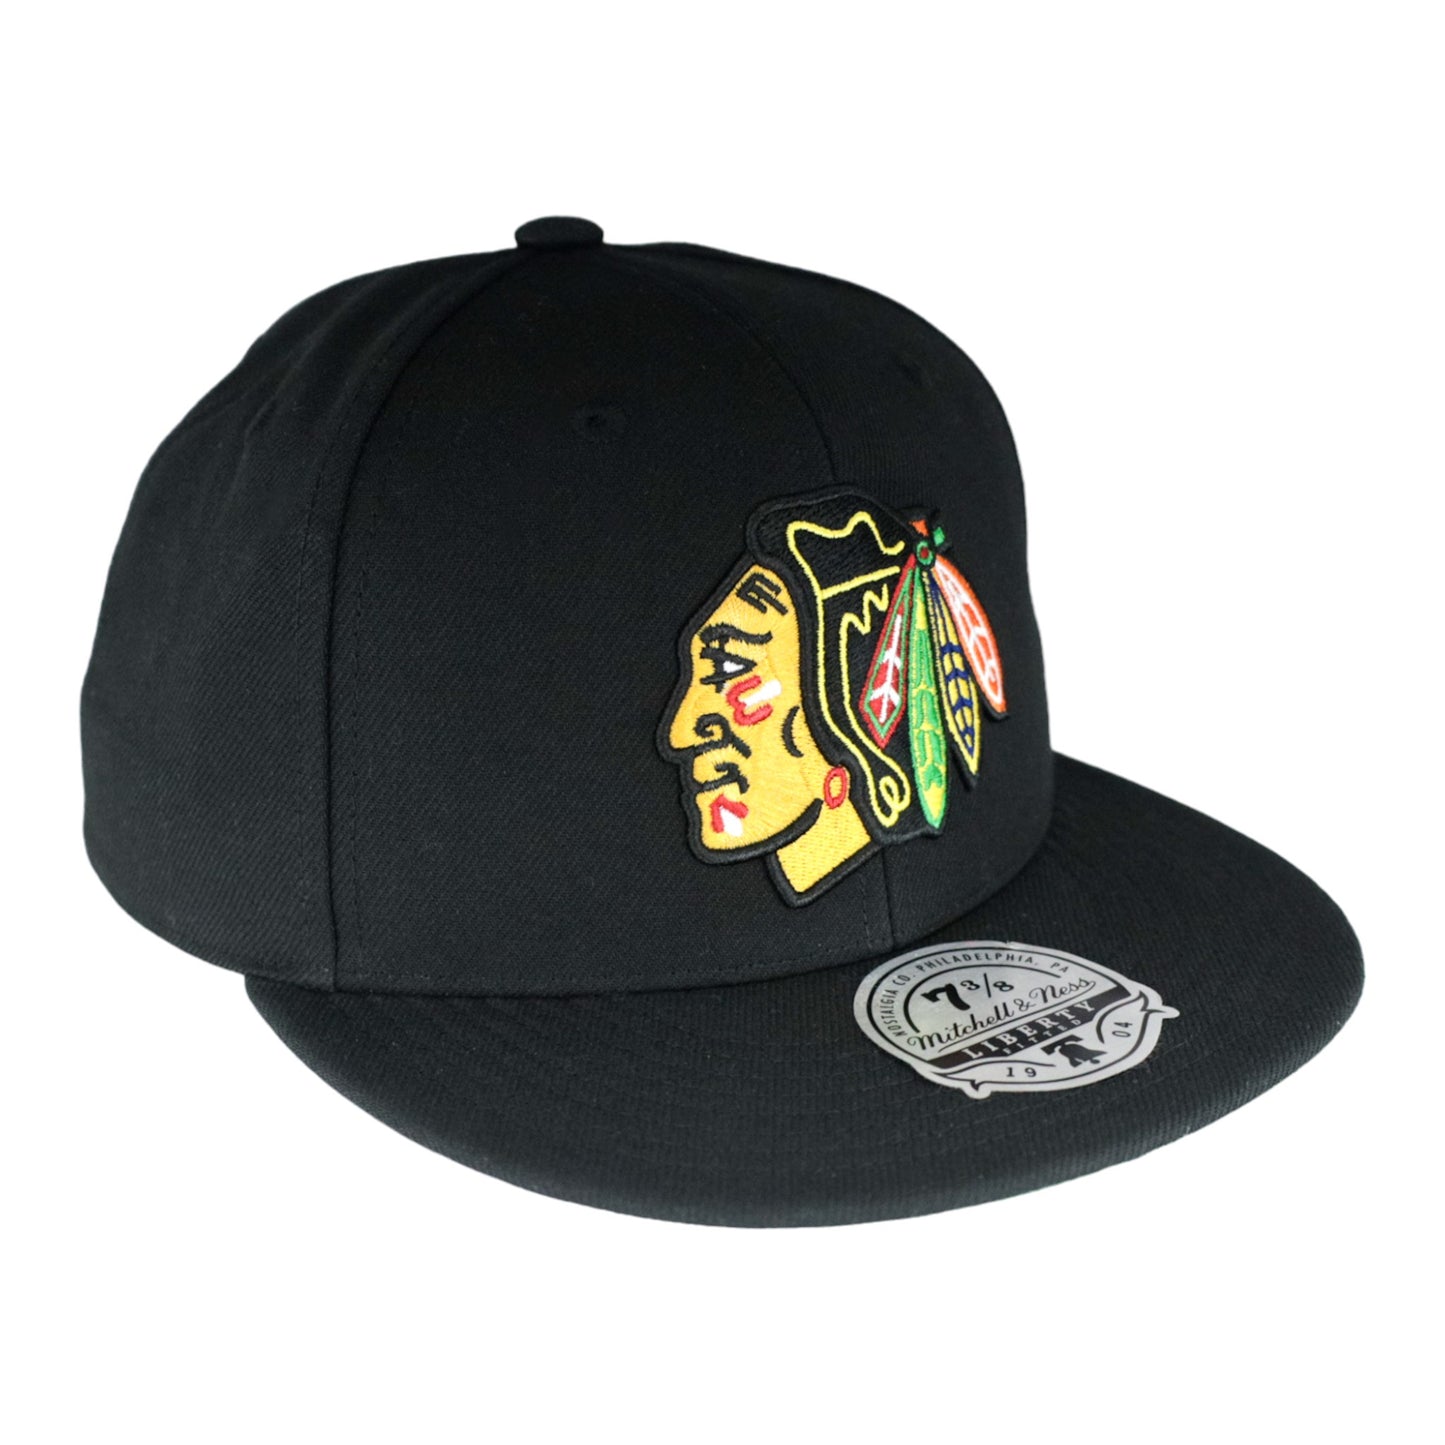 Chicago Blackhawks Black Liberty Mitchell & Ness Fitted Hat